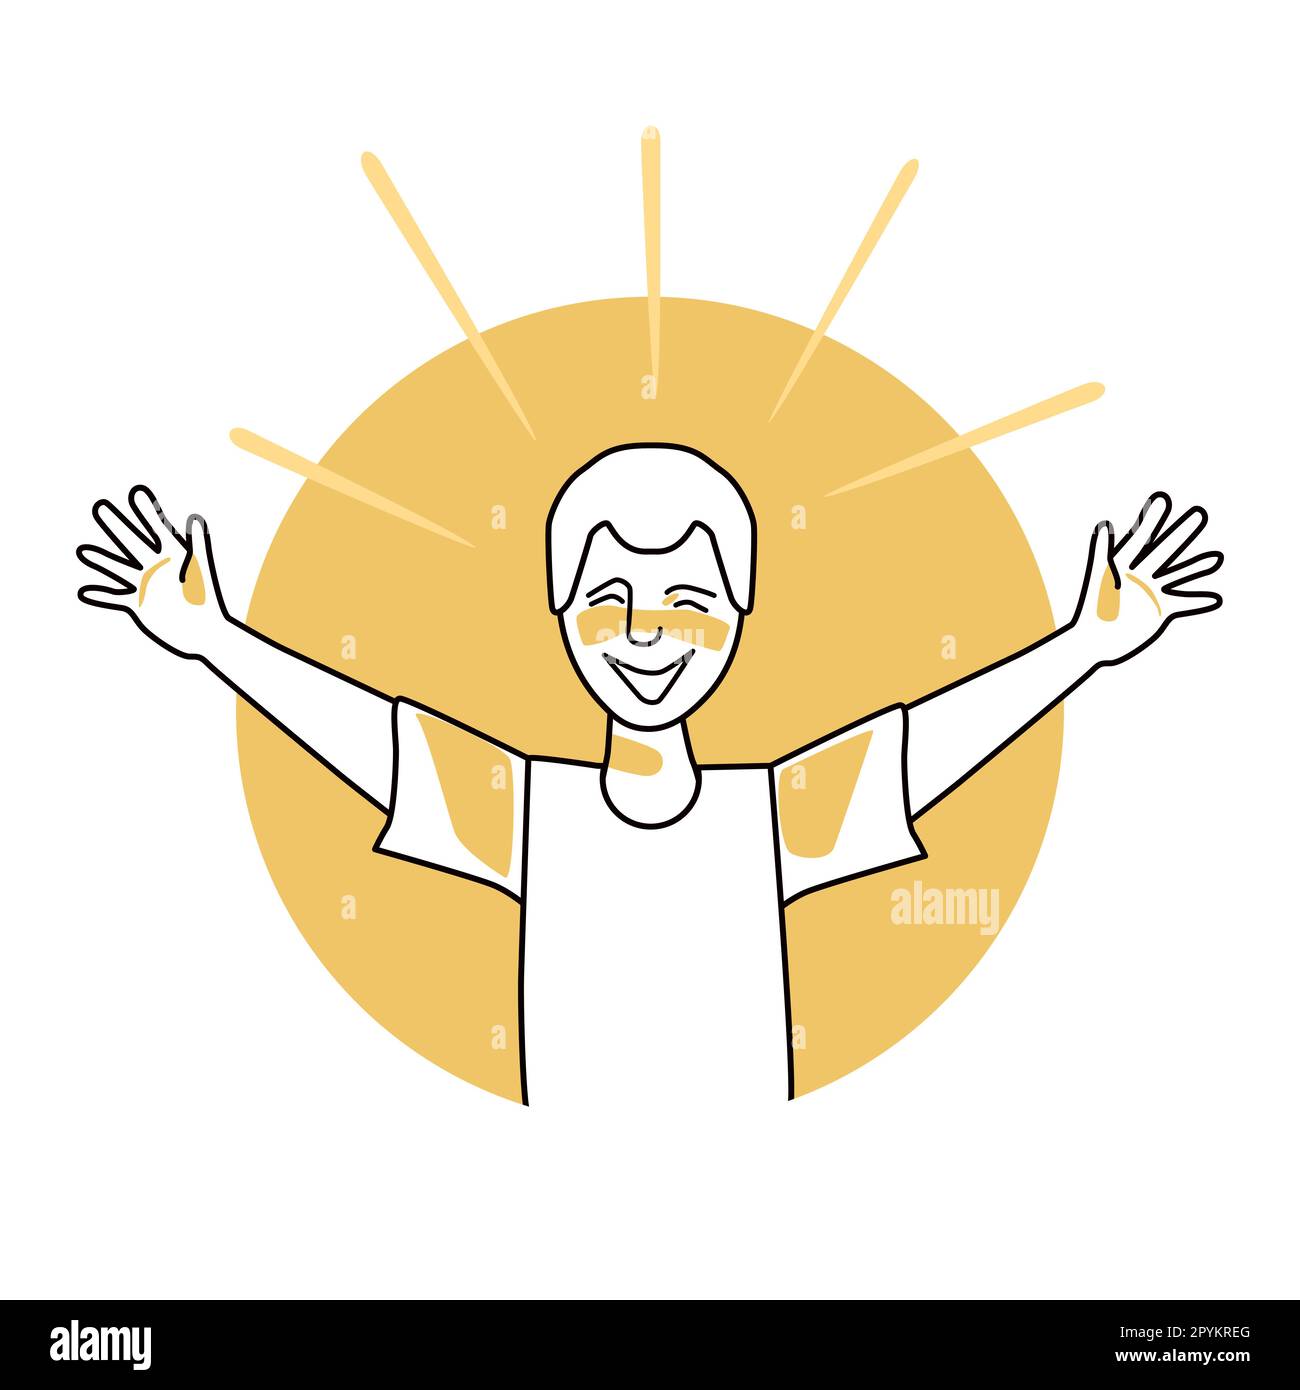 Happy boy, emotion of happiness, facial expression with gestures. Joyful teenager with white hair, expressing his happy feelings. Yellow vector circle Stock Vector